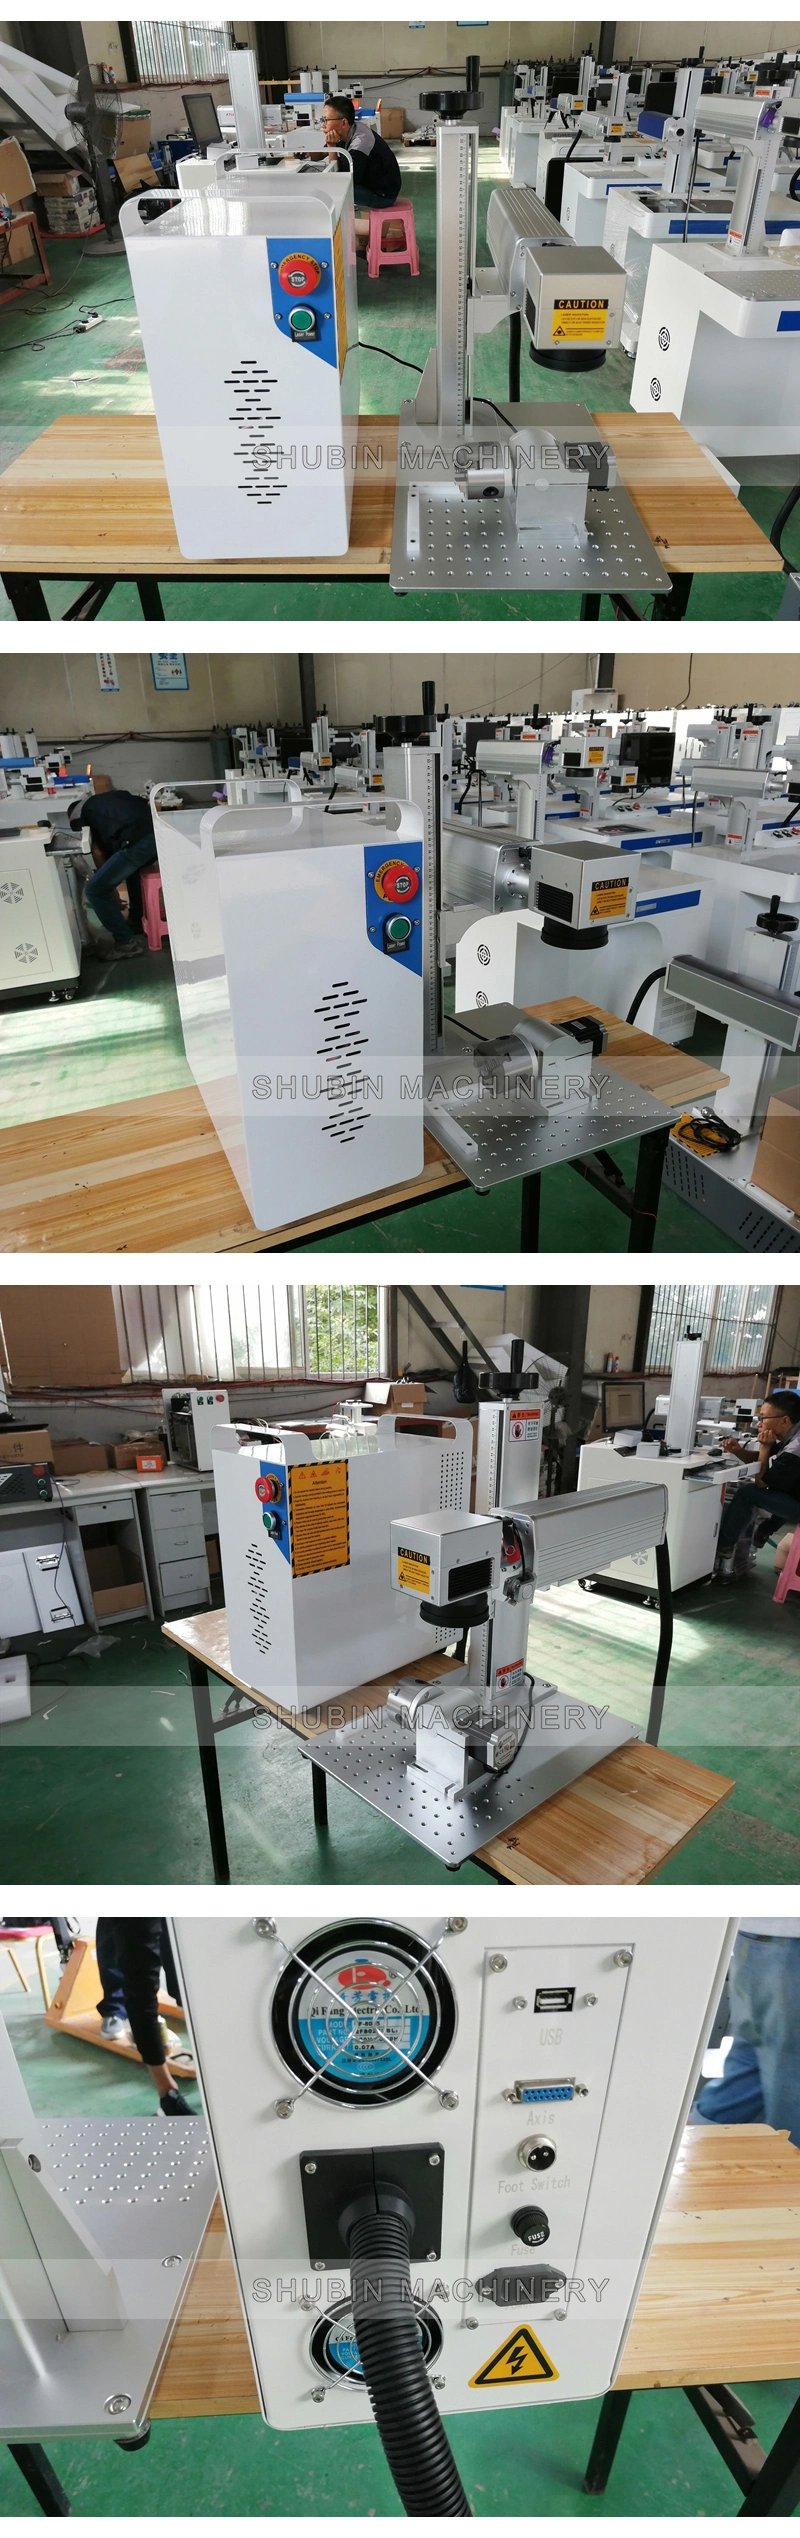 Raycus Fiber Laser Marking Machine 50W Making Machine with Rotary Axis for Jewelry Silver Gold Bracelet